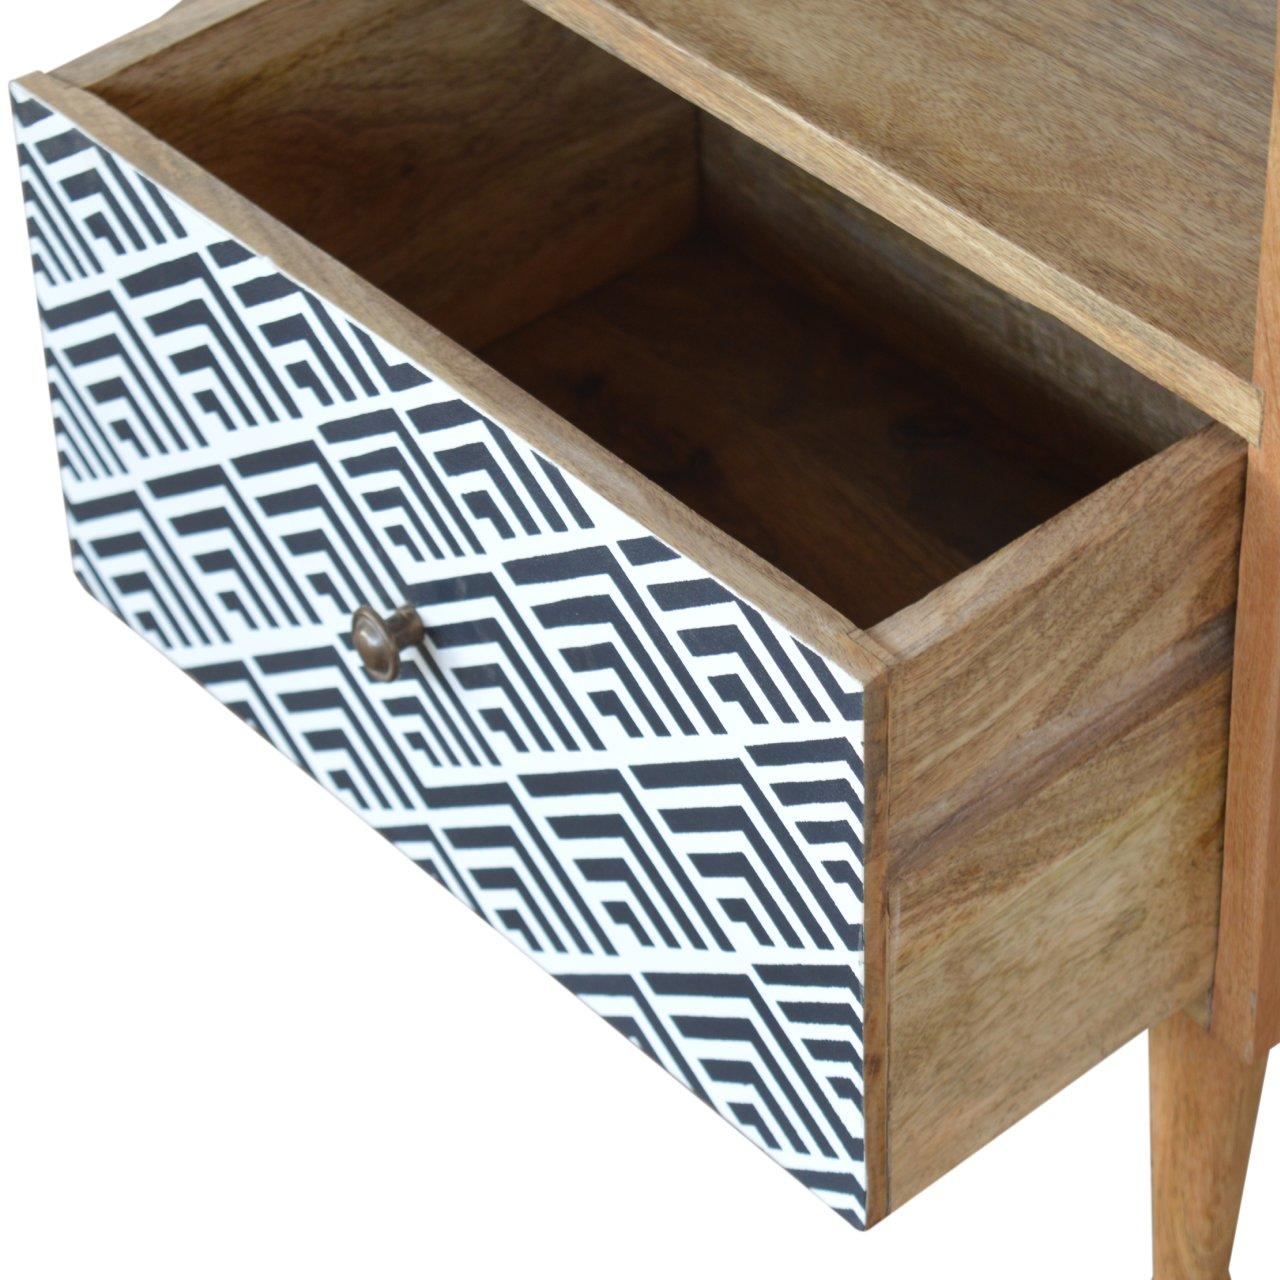 Monochrome Print Bedside With Open Slot